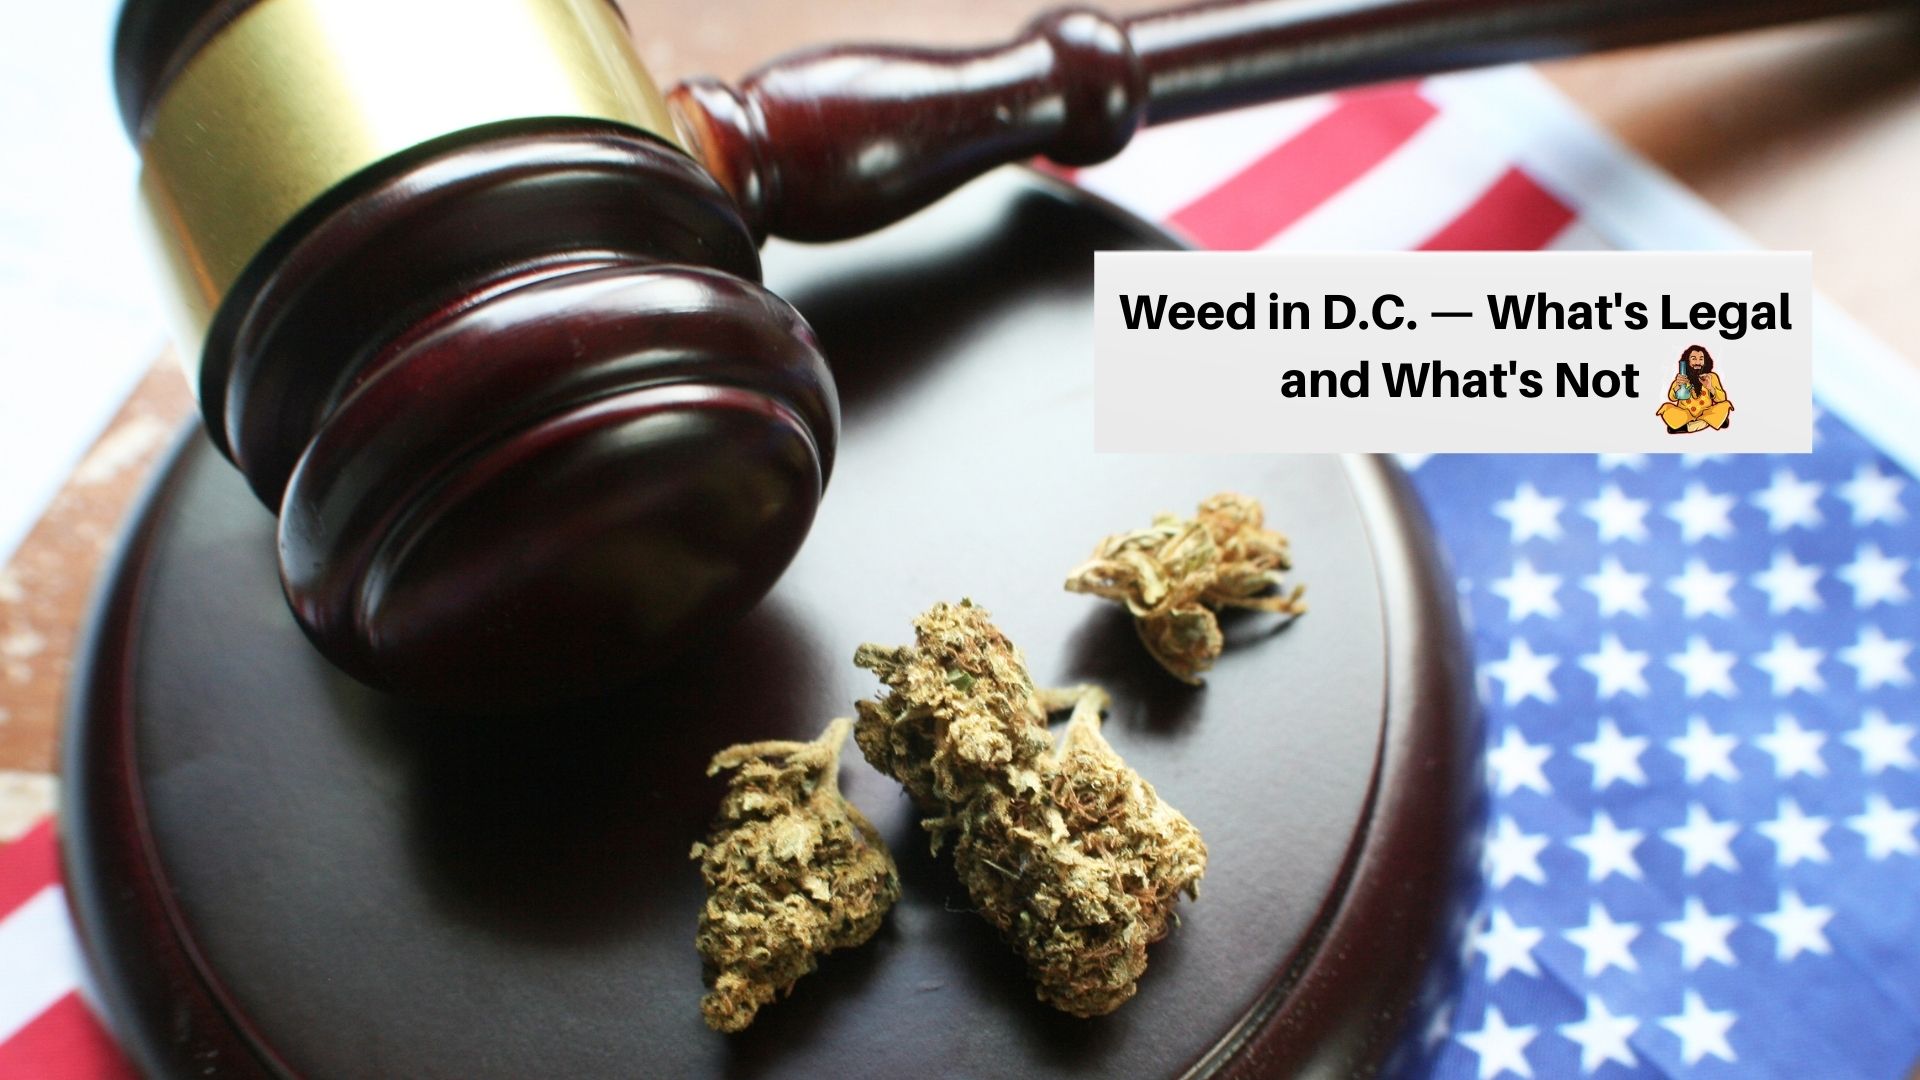 Weed in D.C. — What's Legal and What's Not